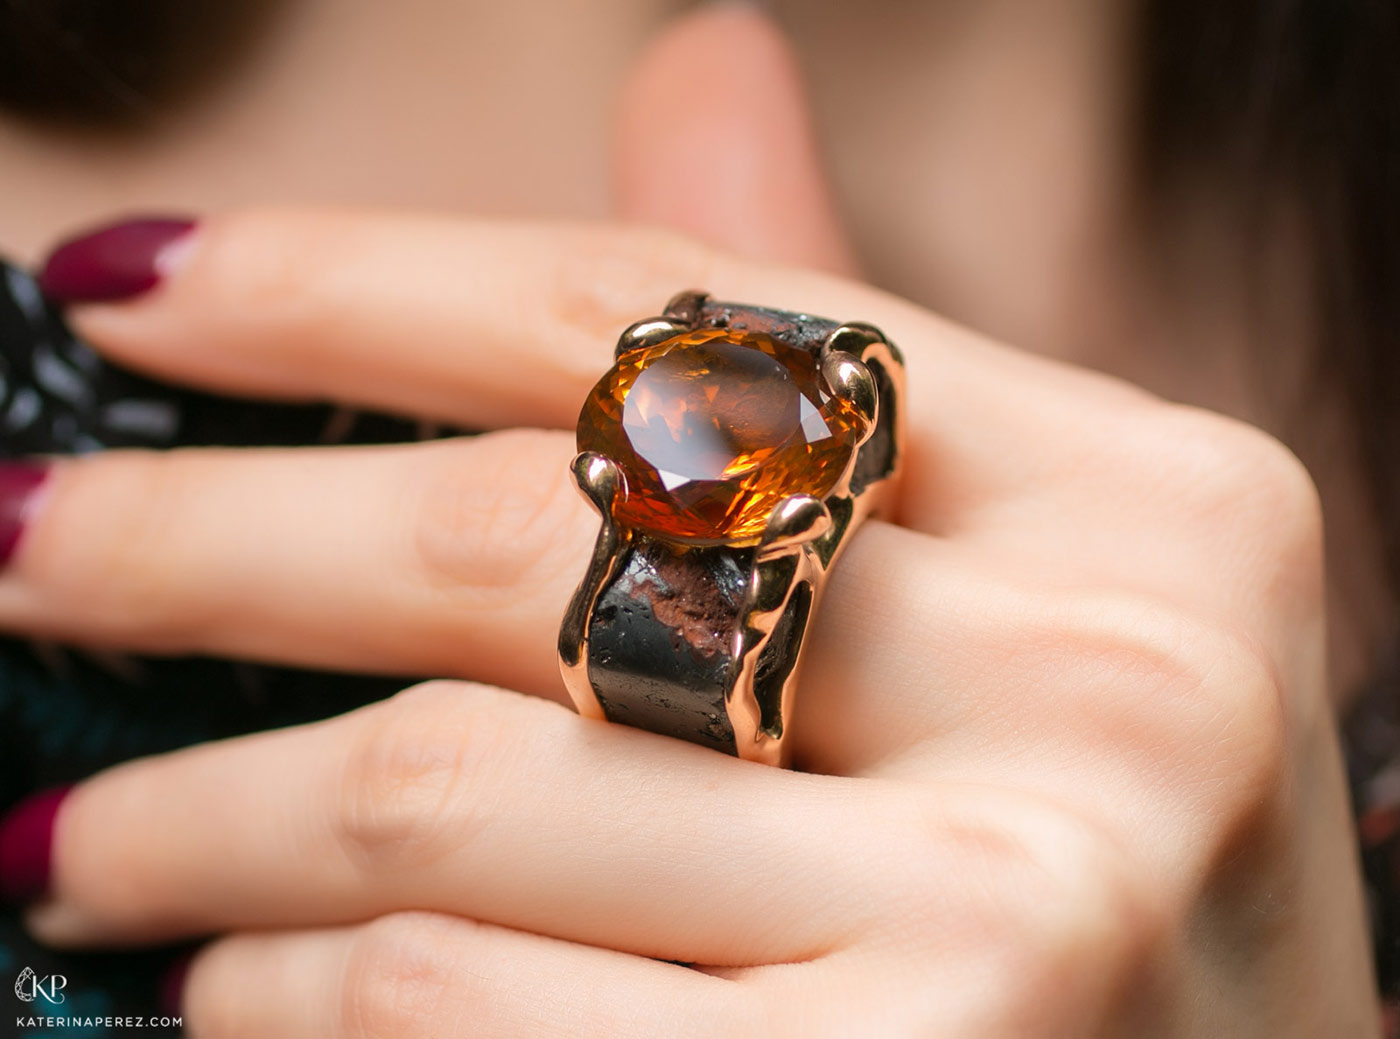 Philippe Pfeiffer ring with 22.40ct Palmeira citrine in hematite and yellow gold